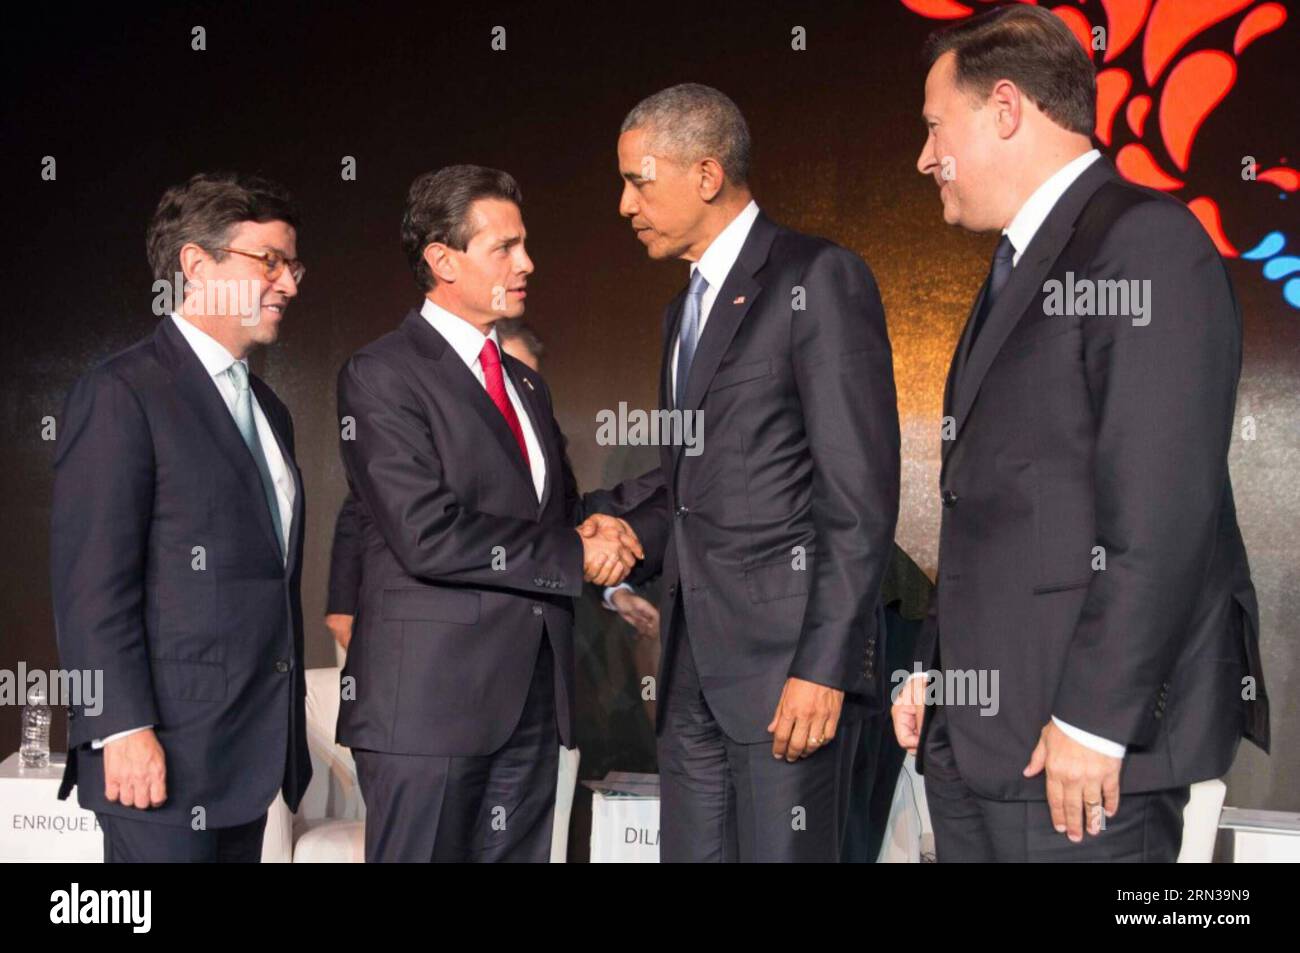 (150411) -- PANAMA CITY, April 11, 2015 -- (From L to R) Image provided by Mexico s Presidency shows Luis Alberto Moreno, president of the Inter-American Development Bank, Mexican President Enrique Pena Nieto, U.S. President Barack Obama and Panamanian President Juan Carlos Varela posing for photos during the Business Summit before the 7th Summit of the Americas, in Panama City, capital of Panama, on April 10, 2015. Mexico s Presidency) (da) PANAMA-PANAMA CITY-AMERICAN SUMMIT-BUSINESS MEETING MEXICANxPRESIDENCY PUBLICATIONxNOTxINxCHN   Panama City April 11 2015 from l to r Image provided by Me Stock Photo